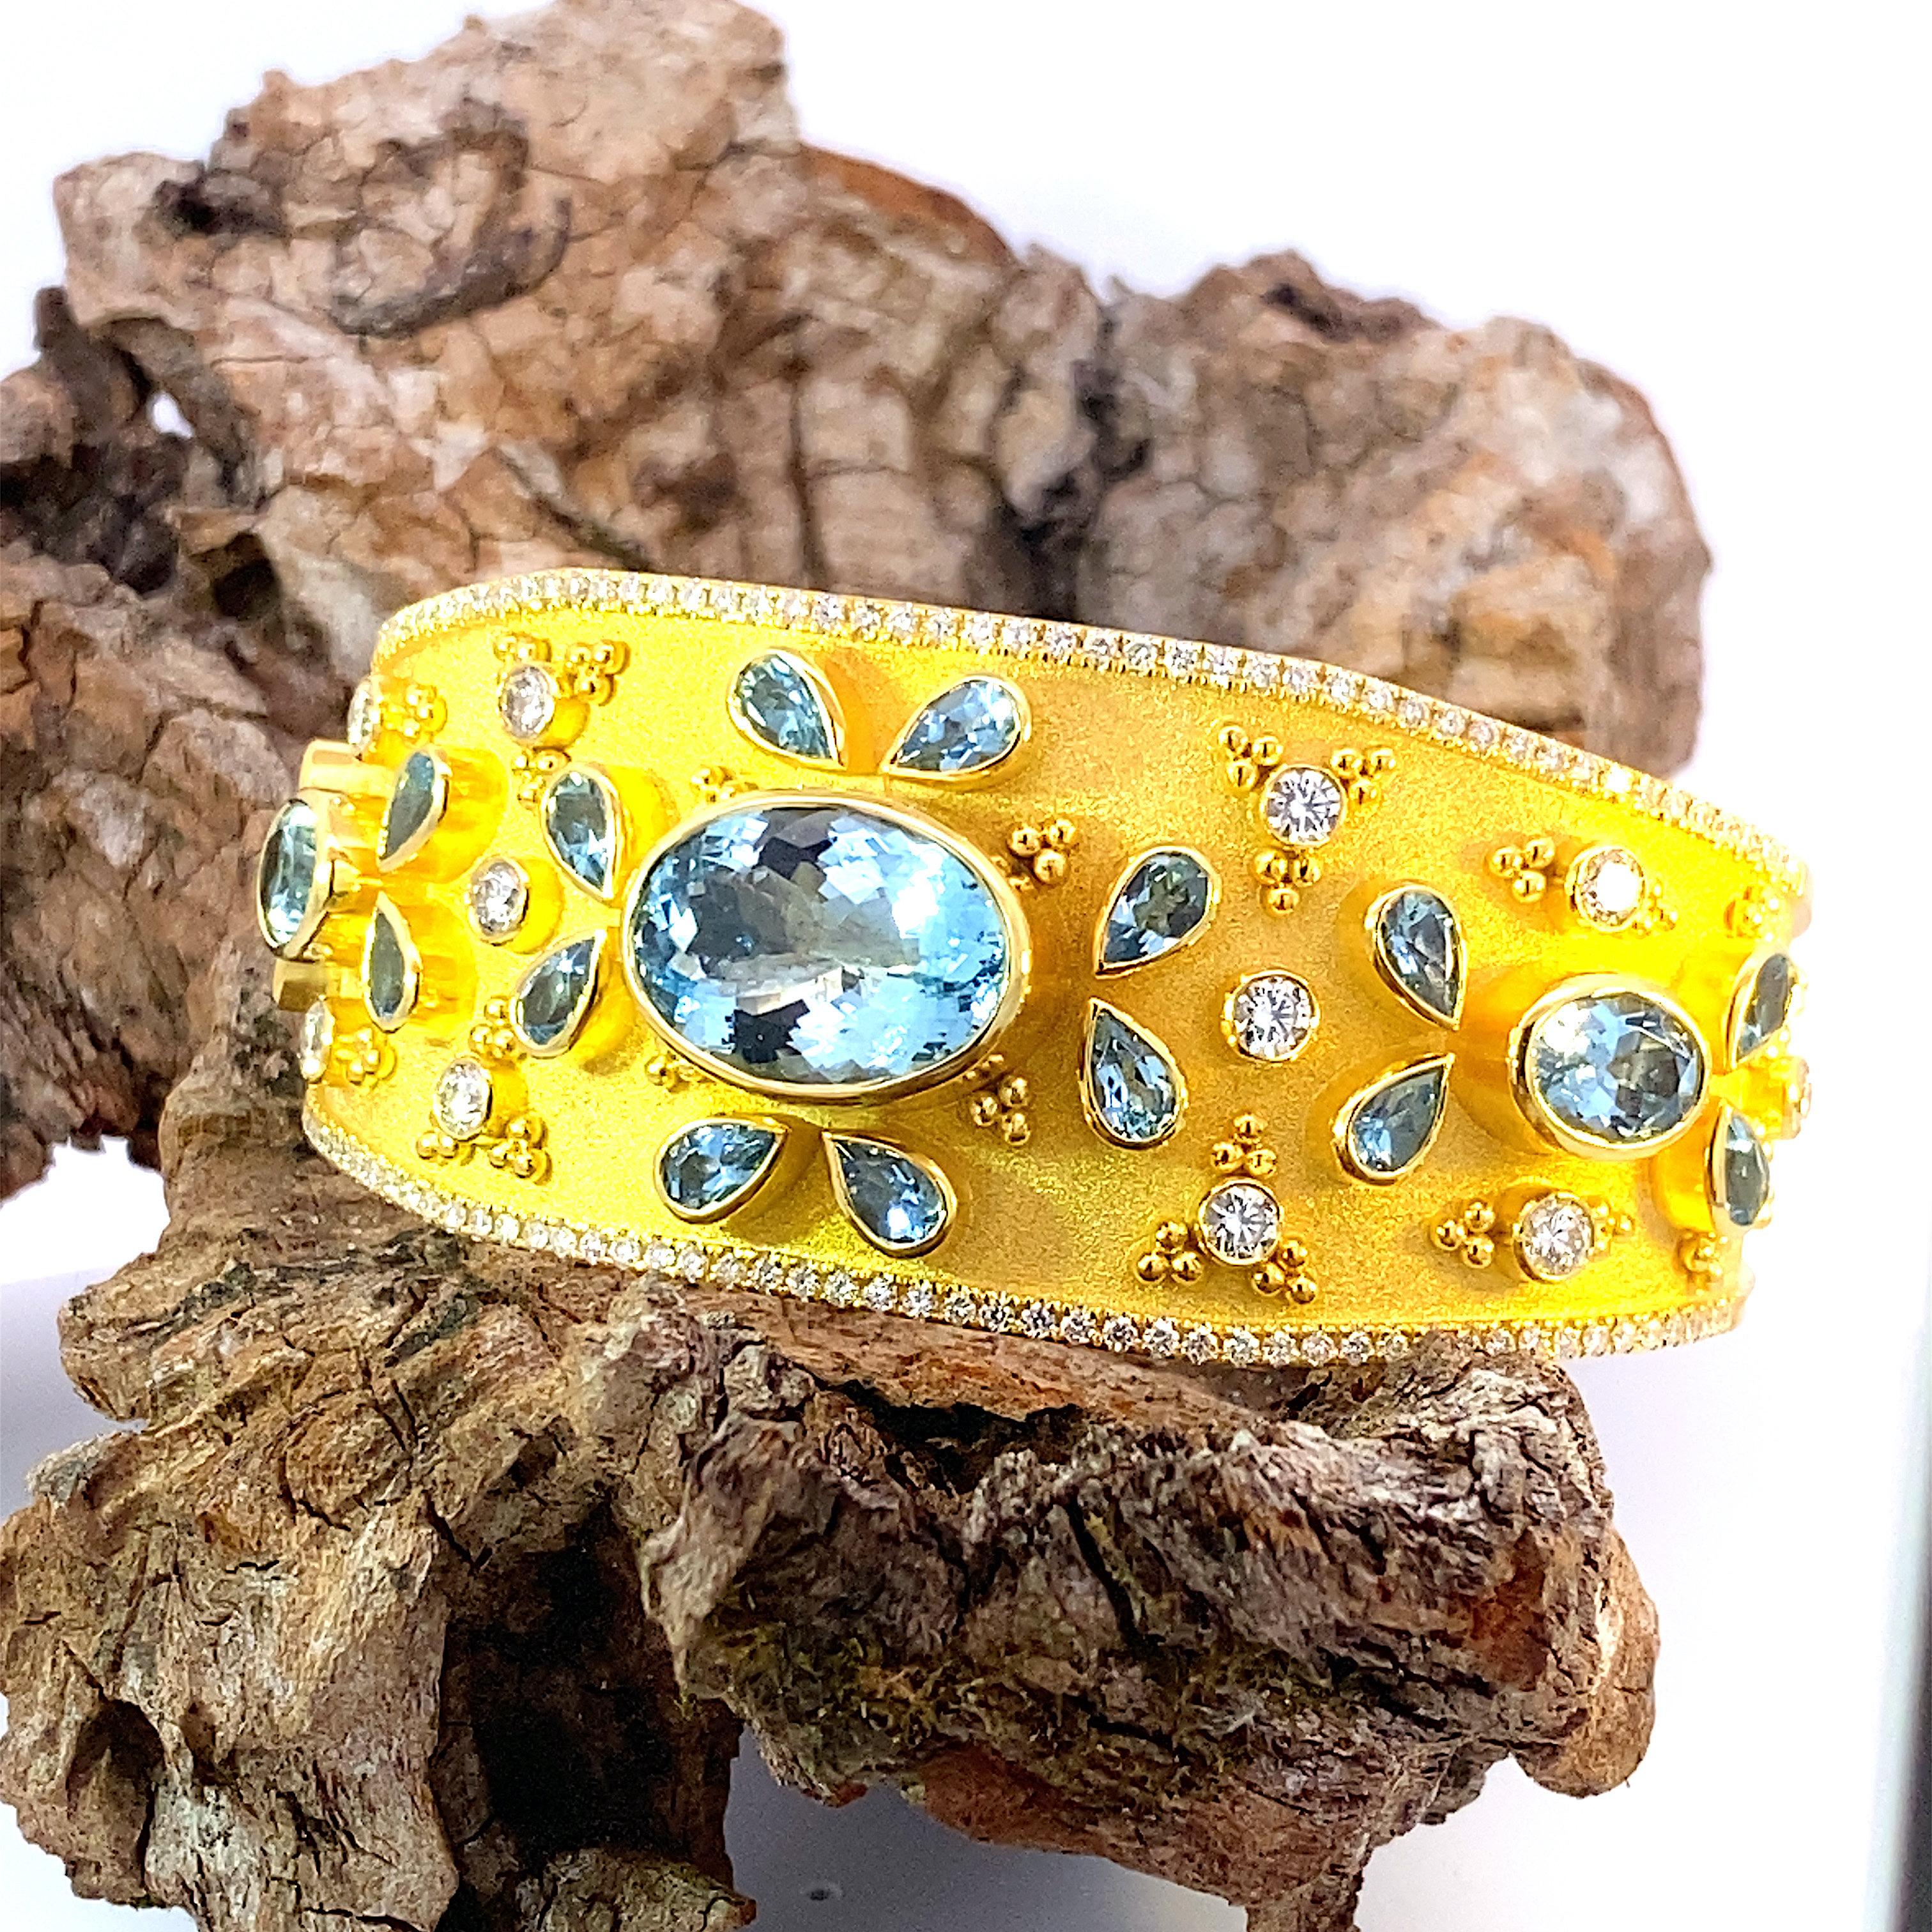 S.Georgios Unique designer bangle bracelet handmade in solid 18 Karat yellow gold. This bracelet is finished in a unique Byzantine-style velvet texture on the background and granulation work. The bracelet features 3 oval cut Aquamarines with a total